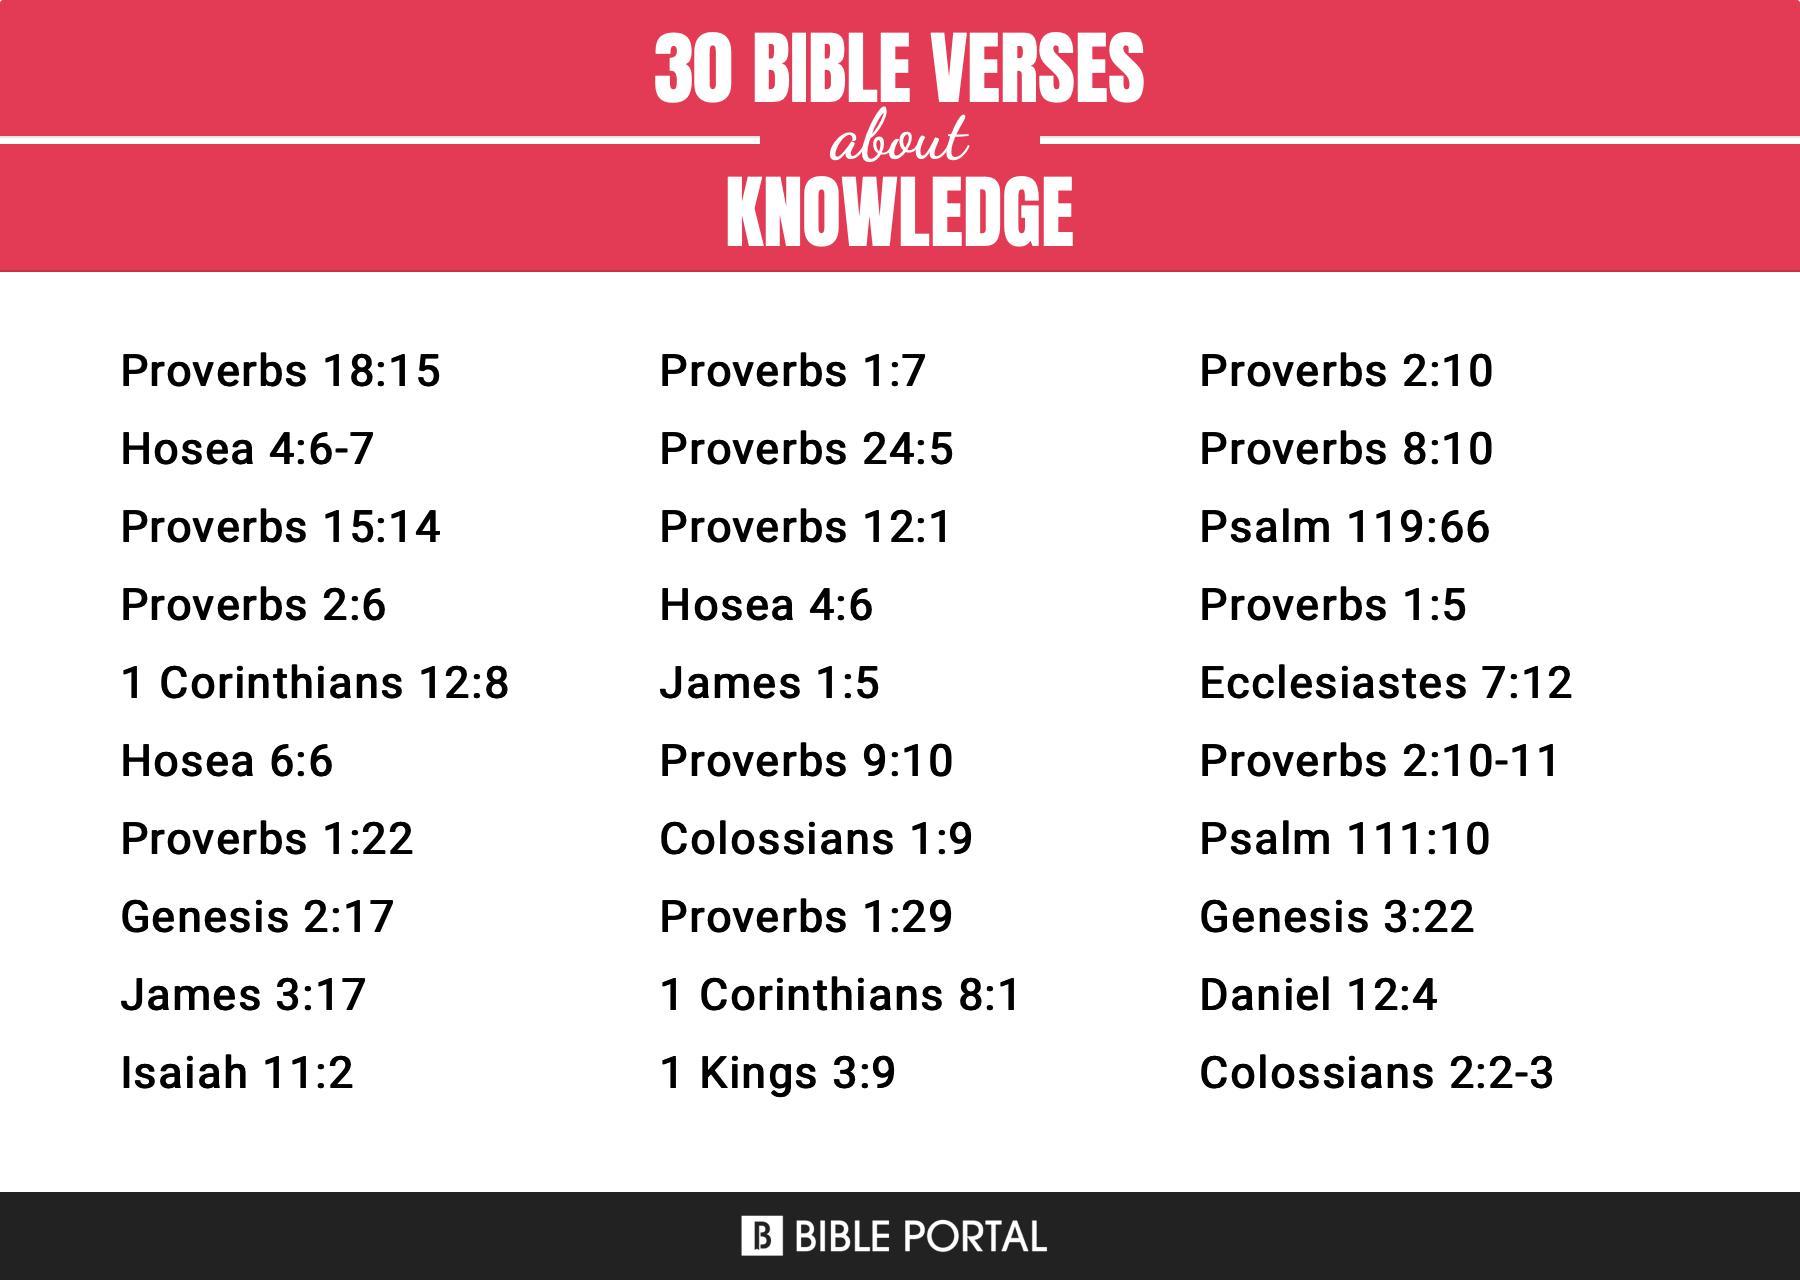 What Does the Bible Say about Knowledge?